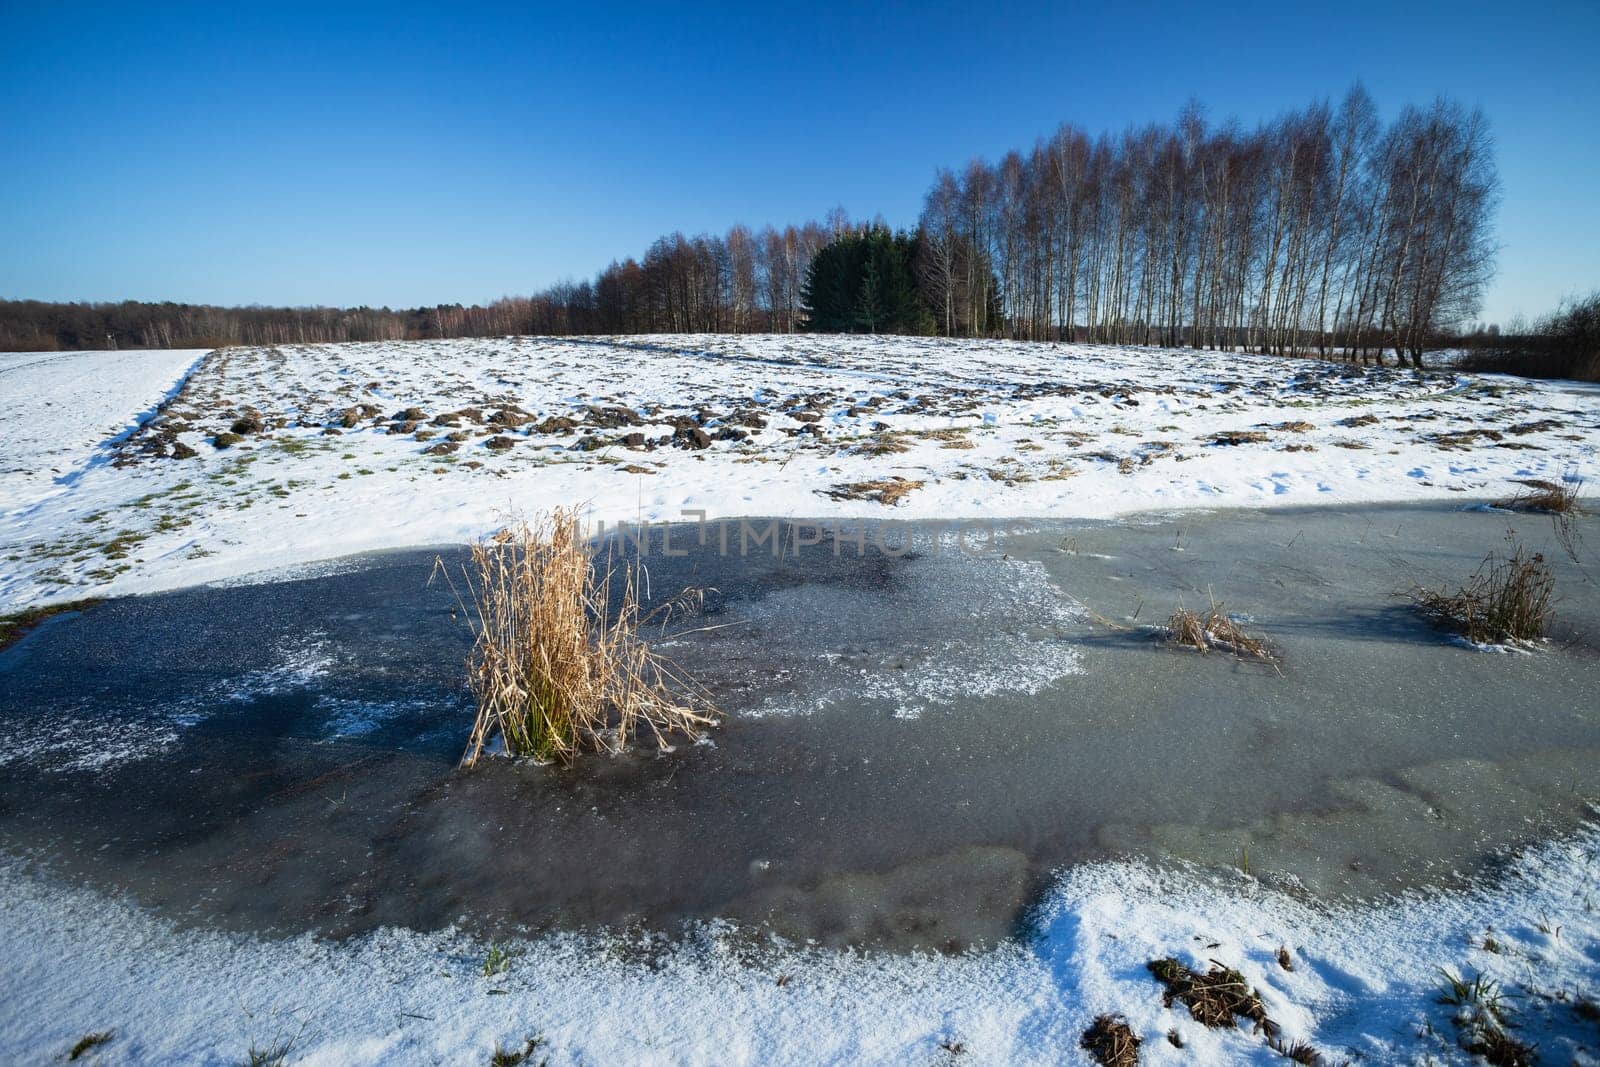 Frozen water and snow on a farm field, view on a sunny winter day by darekb22